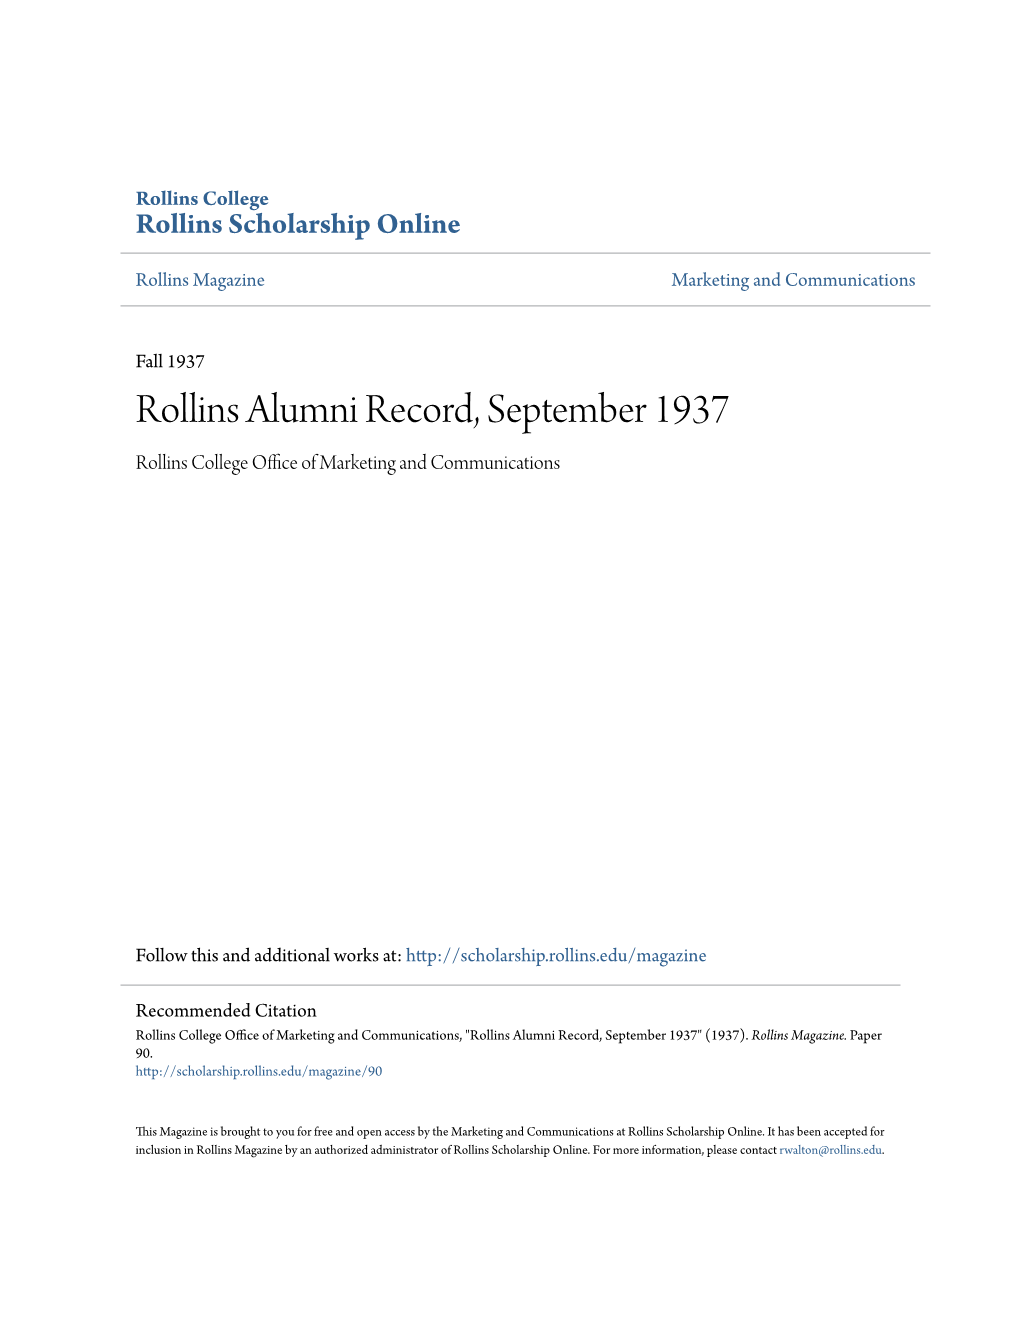 Rollins Alumni Record, September 1937 Rollins College Office Ofa M Rketing and Communications